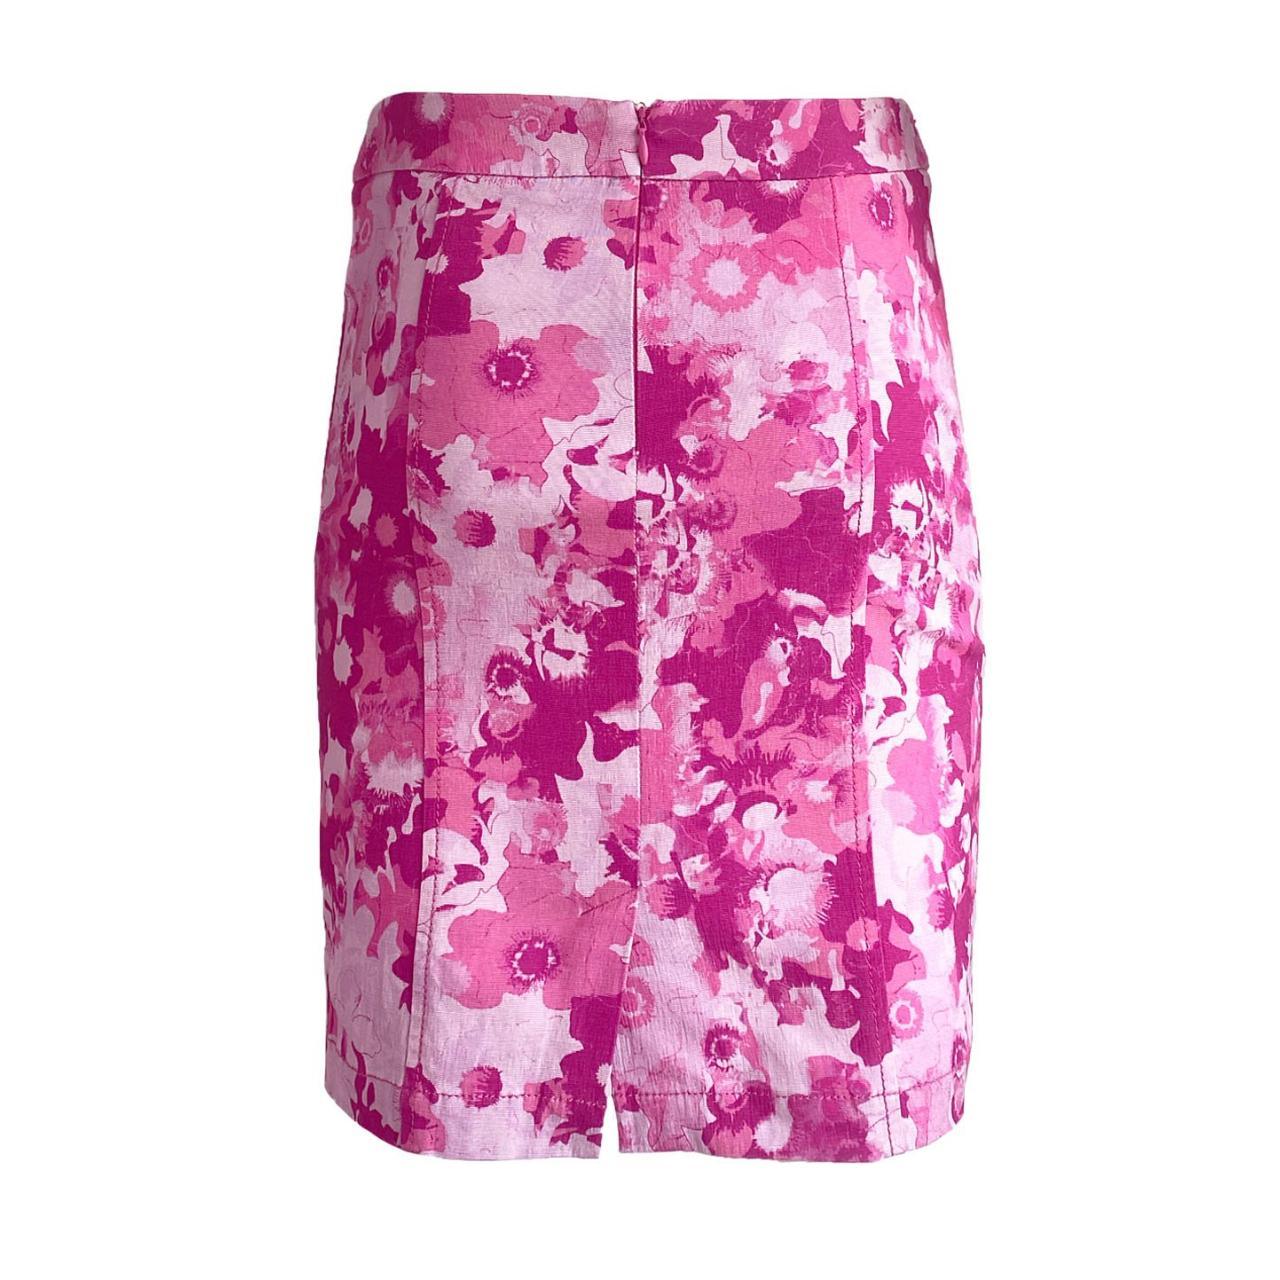 VERSACE JEANS PINK FLORAL SKIRT - 2